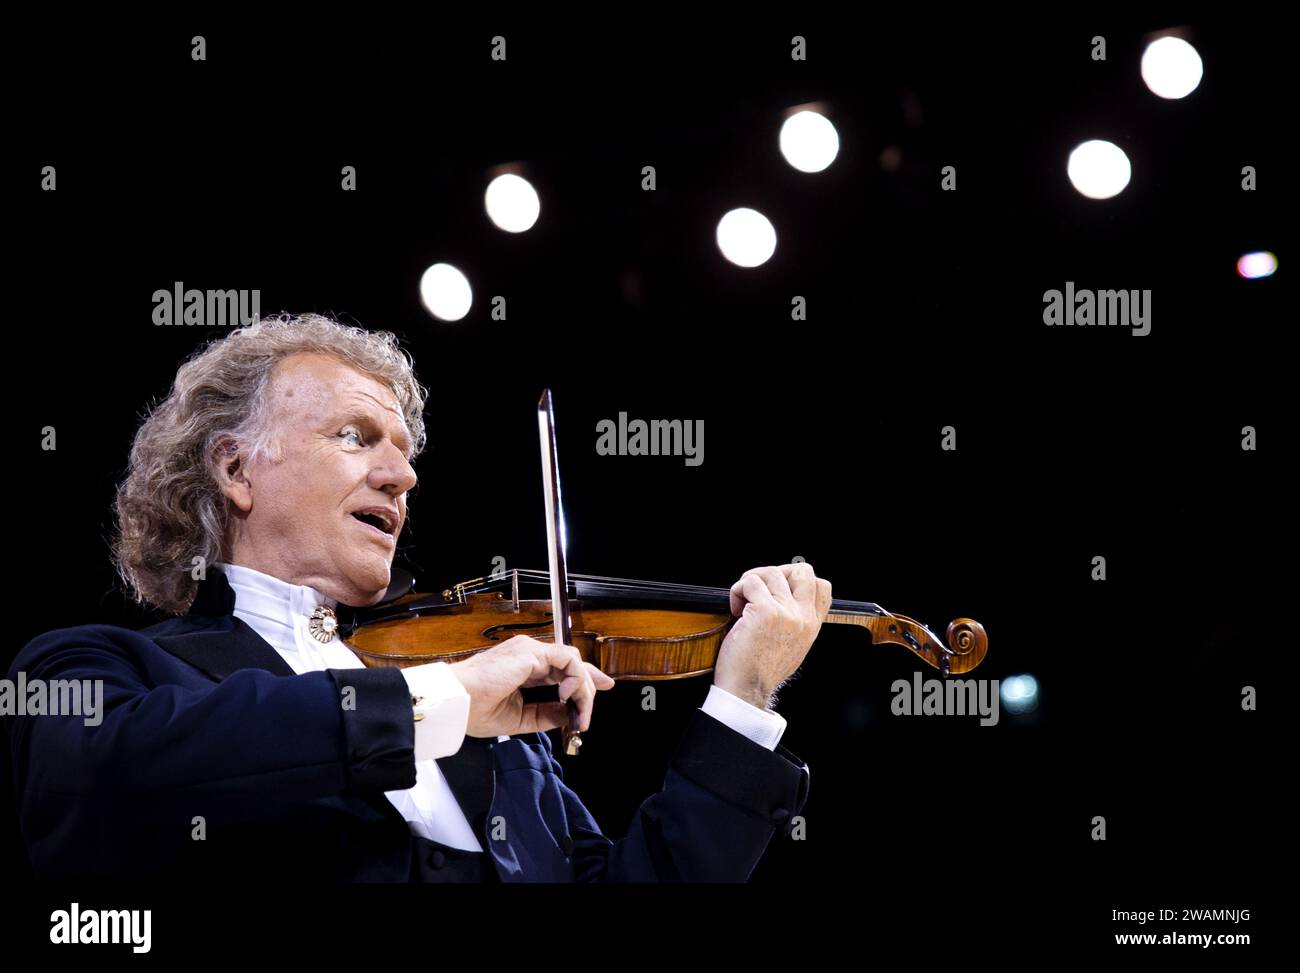 AMSTERDAM - Violinist Andre Rieu during a New Year's concert in the Ziggo Dome. ANP RAMON VAN FLYMEN netherlands out - belgium out Stock Photo